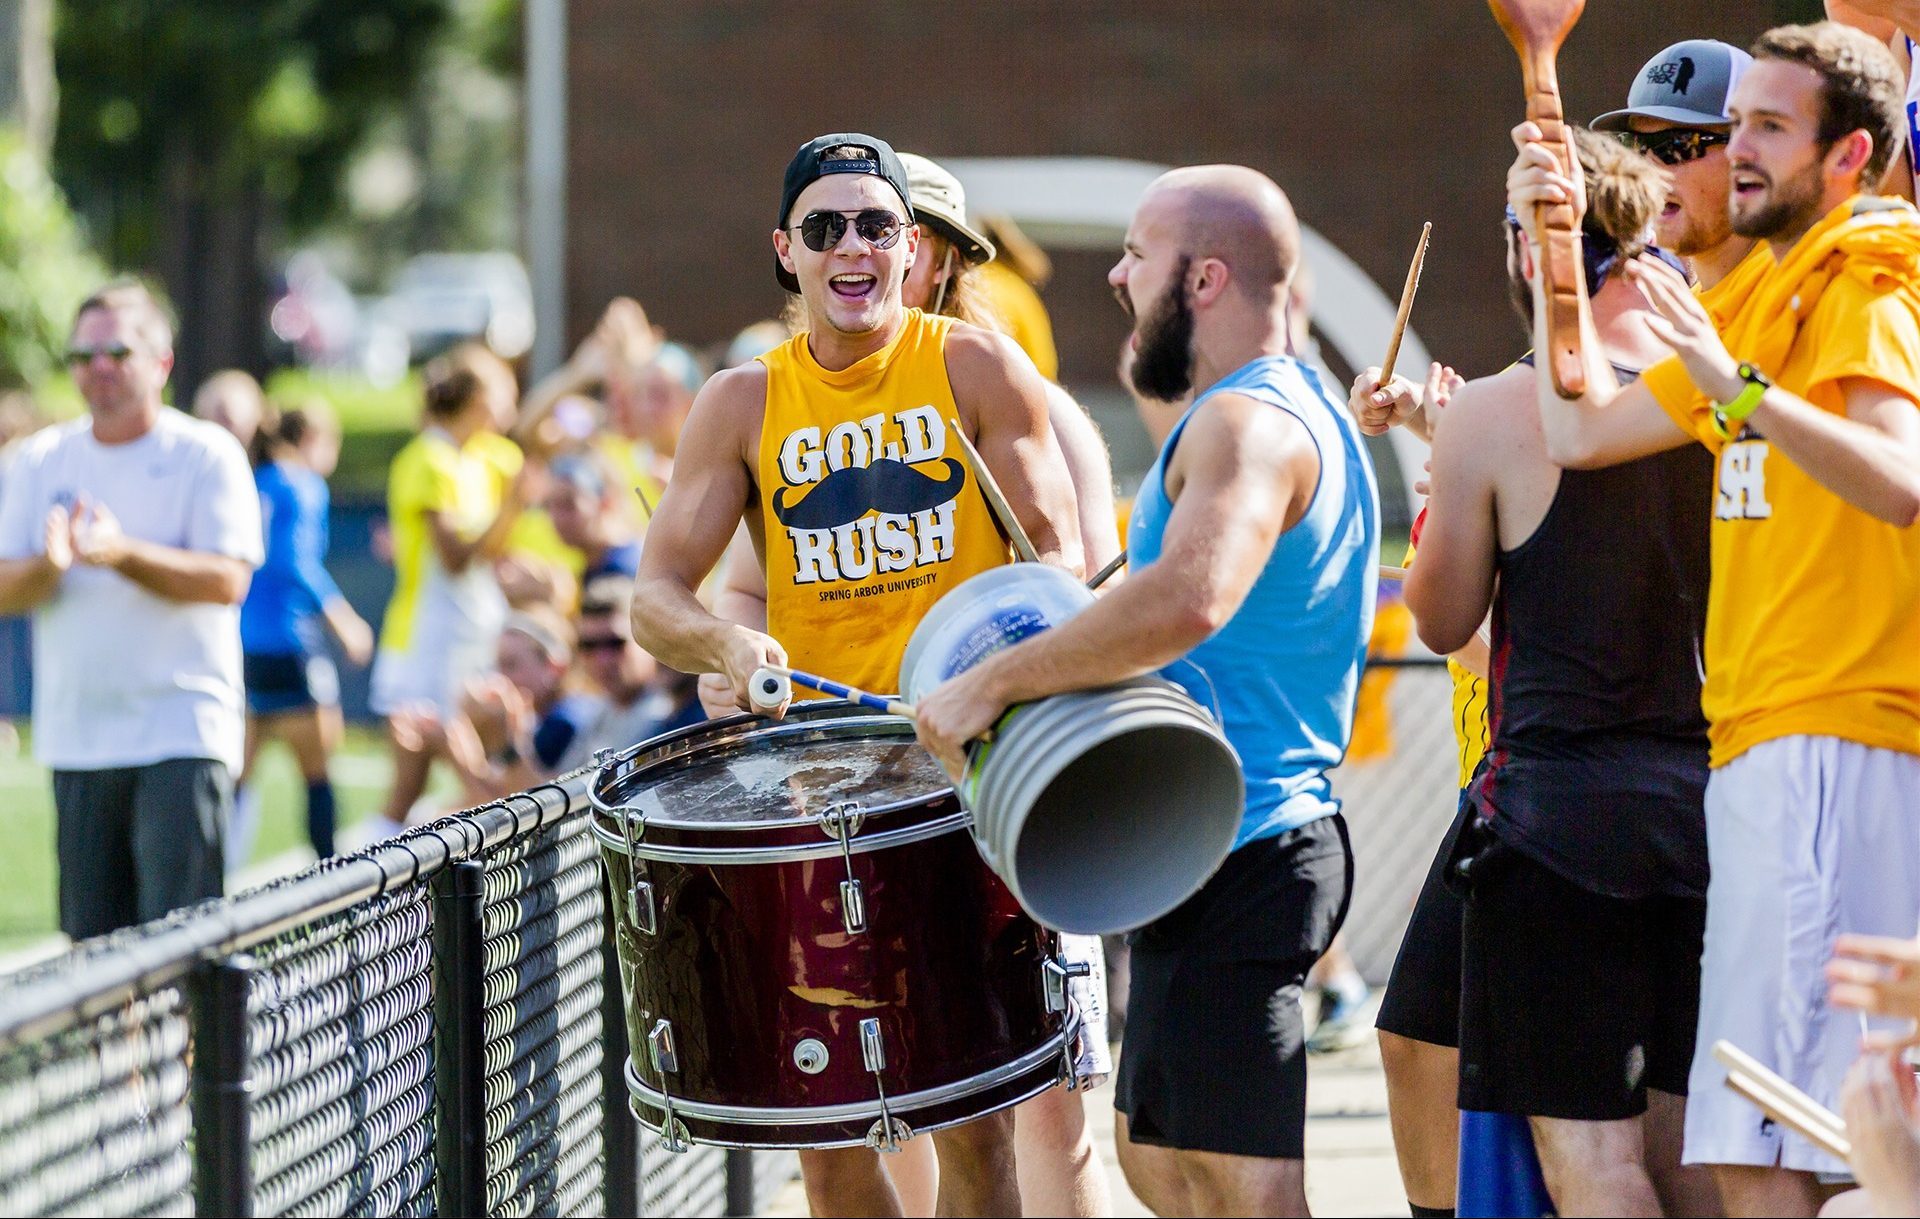 Student section cheering and playing drums at a Cougars soccer game